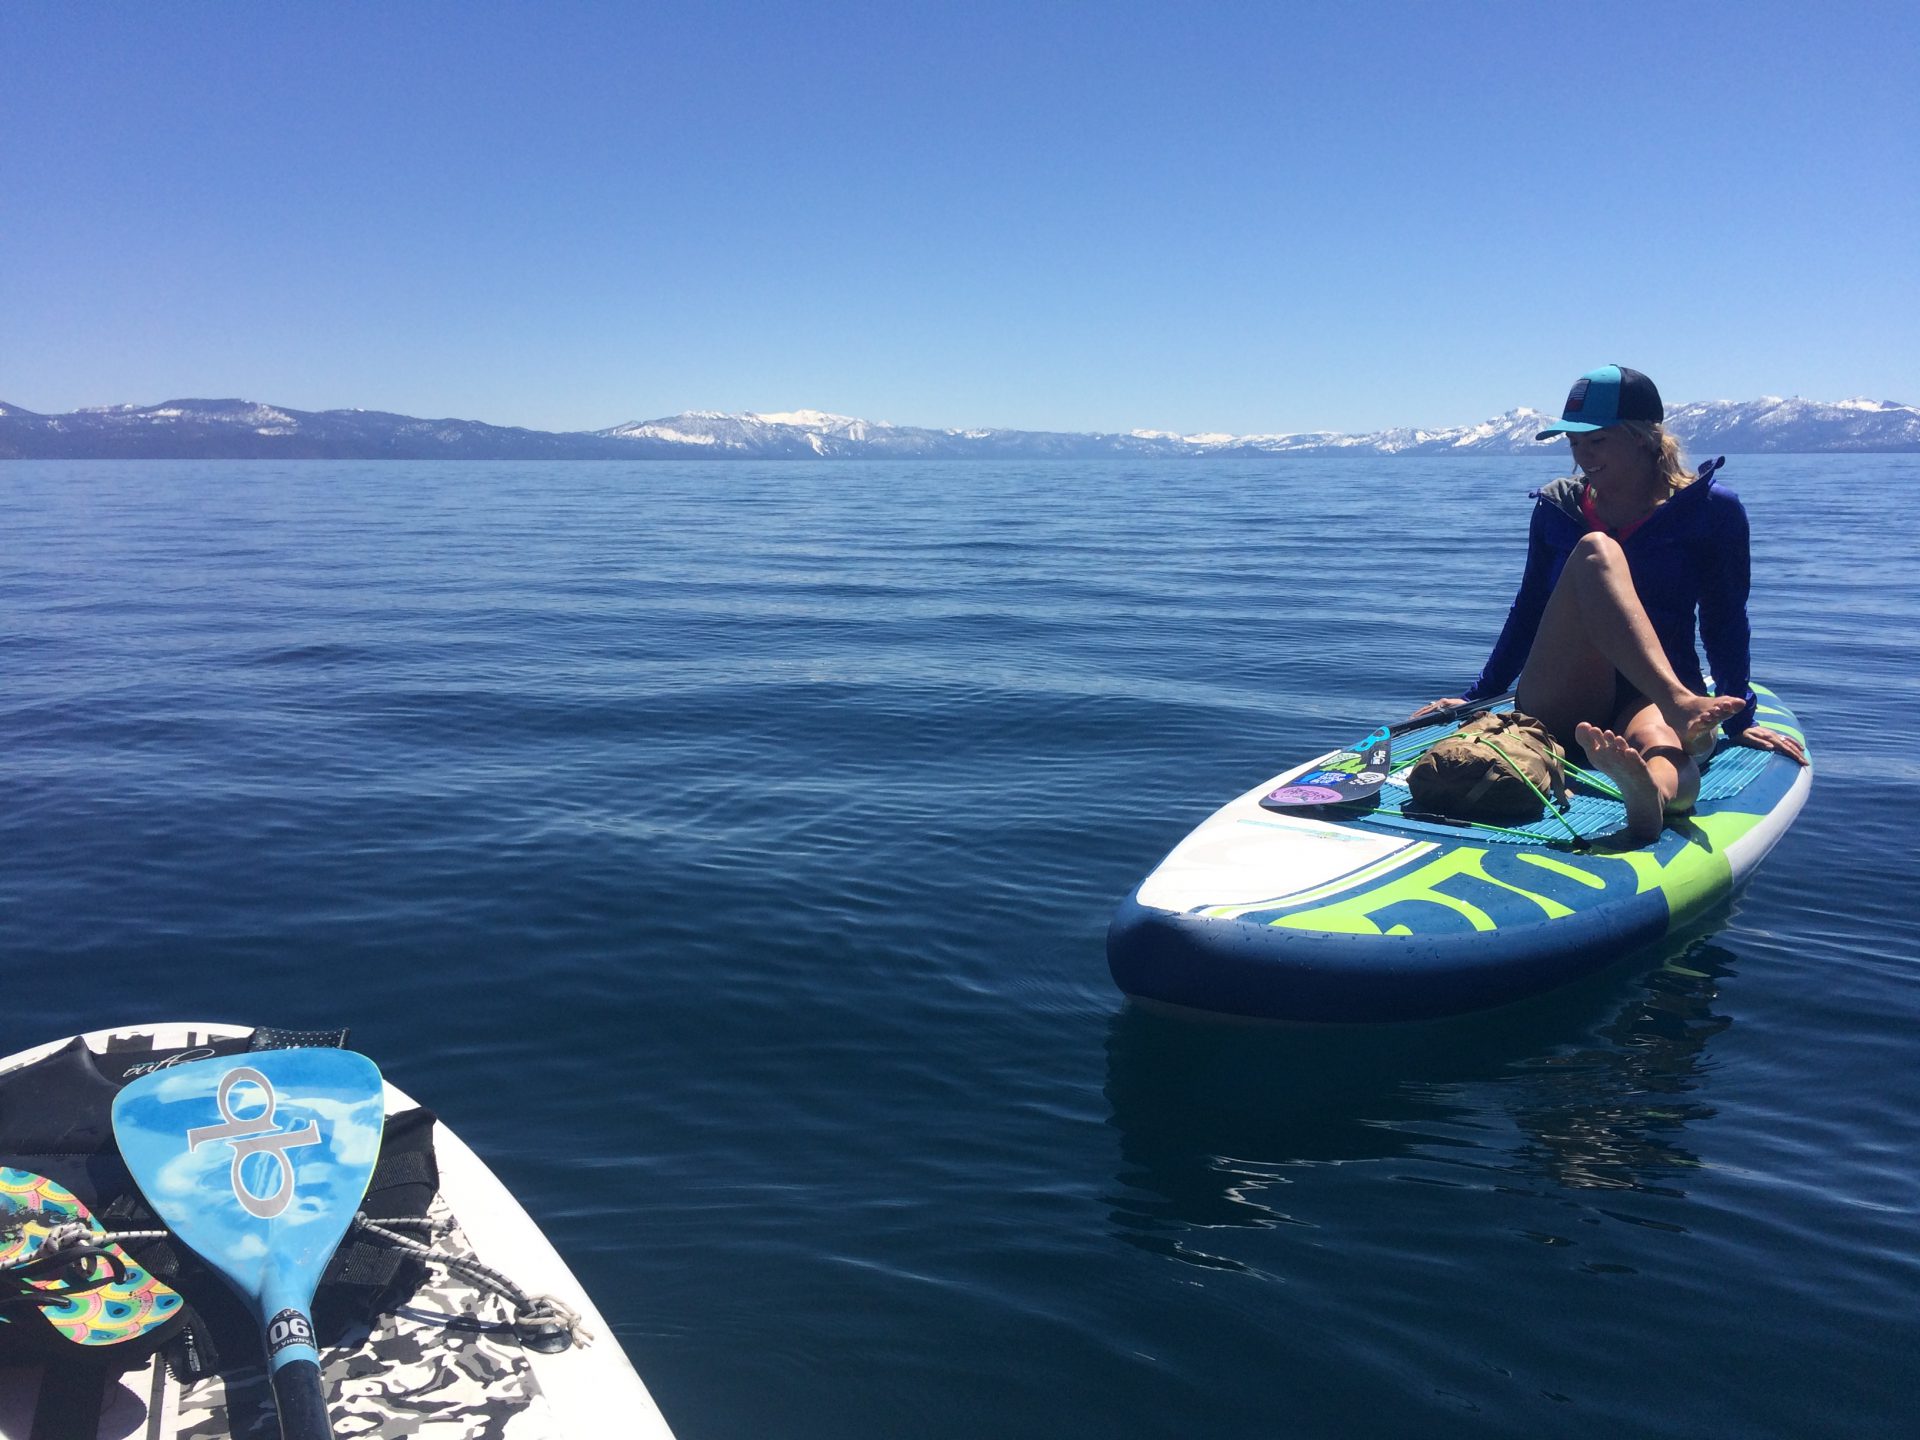 Resting on the paddleboard Lake Tahoe